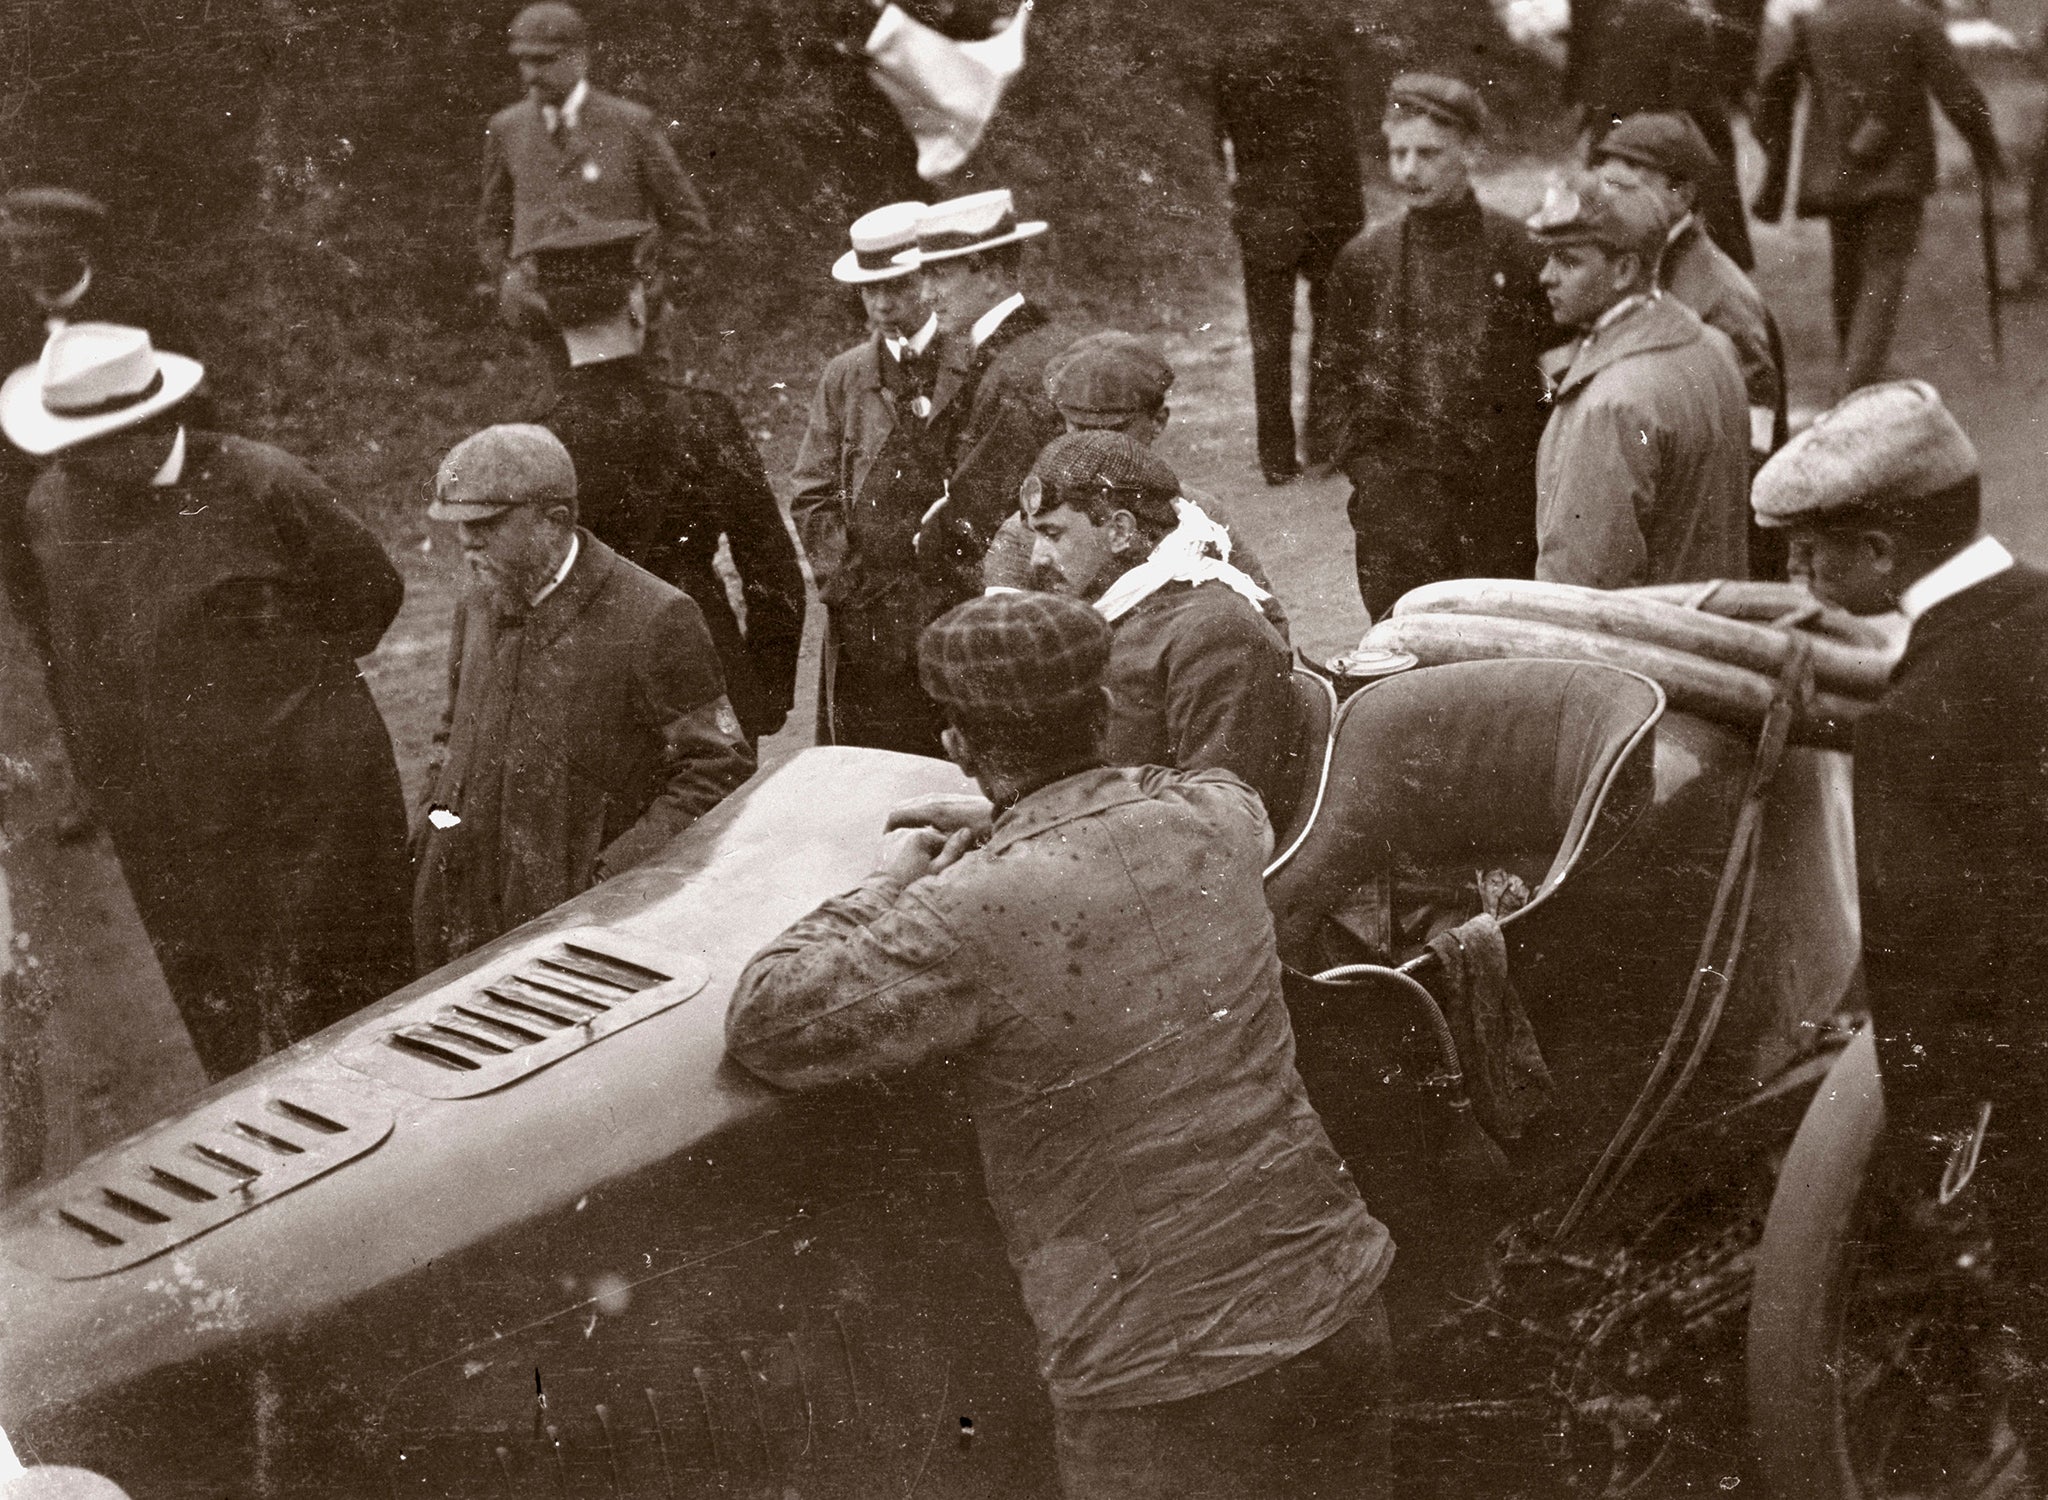 IRELAND - NOVEMBER 29:  Photograph taken from an album of images compiled by English motor car manufacturer and aviator Charles Stewart Rolls (1877-1910), showing Gabriel in his Mors Z surrounded by spectators. The prestigious Gordon Bennett Trophy race was first held in 1900. As the 1902 race had been won for Britain by S F Edge, the British had the honour of hosting the 1903 event, staging it at a circuit at Athy, in Ireland. The race was won for Germany by Camille Jenatzy, driving a Mercedes, Gabriel finishing fourth for France. Rolls was a well known competitor on the motor racing circuit at the time. He failed to gain selection for the 1903 Gordon Bennett race, coming second in an elimination heat held on the Duke of Portland�s estate at Welbeck, Nottinghamshire.  (Photo by SSPL/Getty Images)